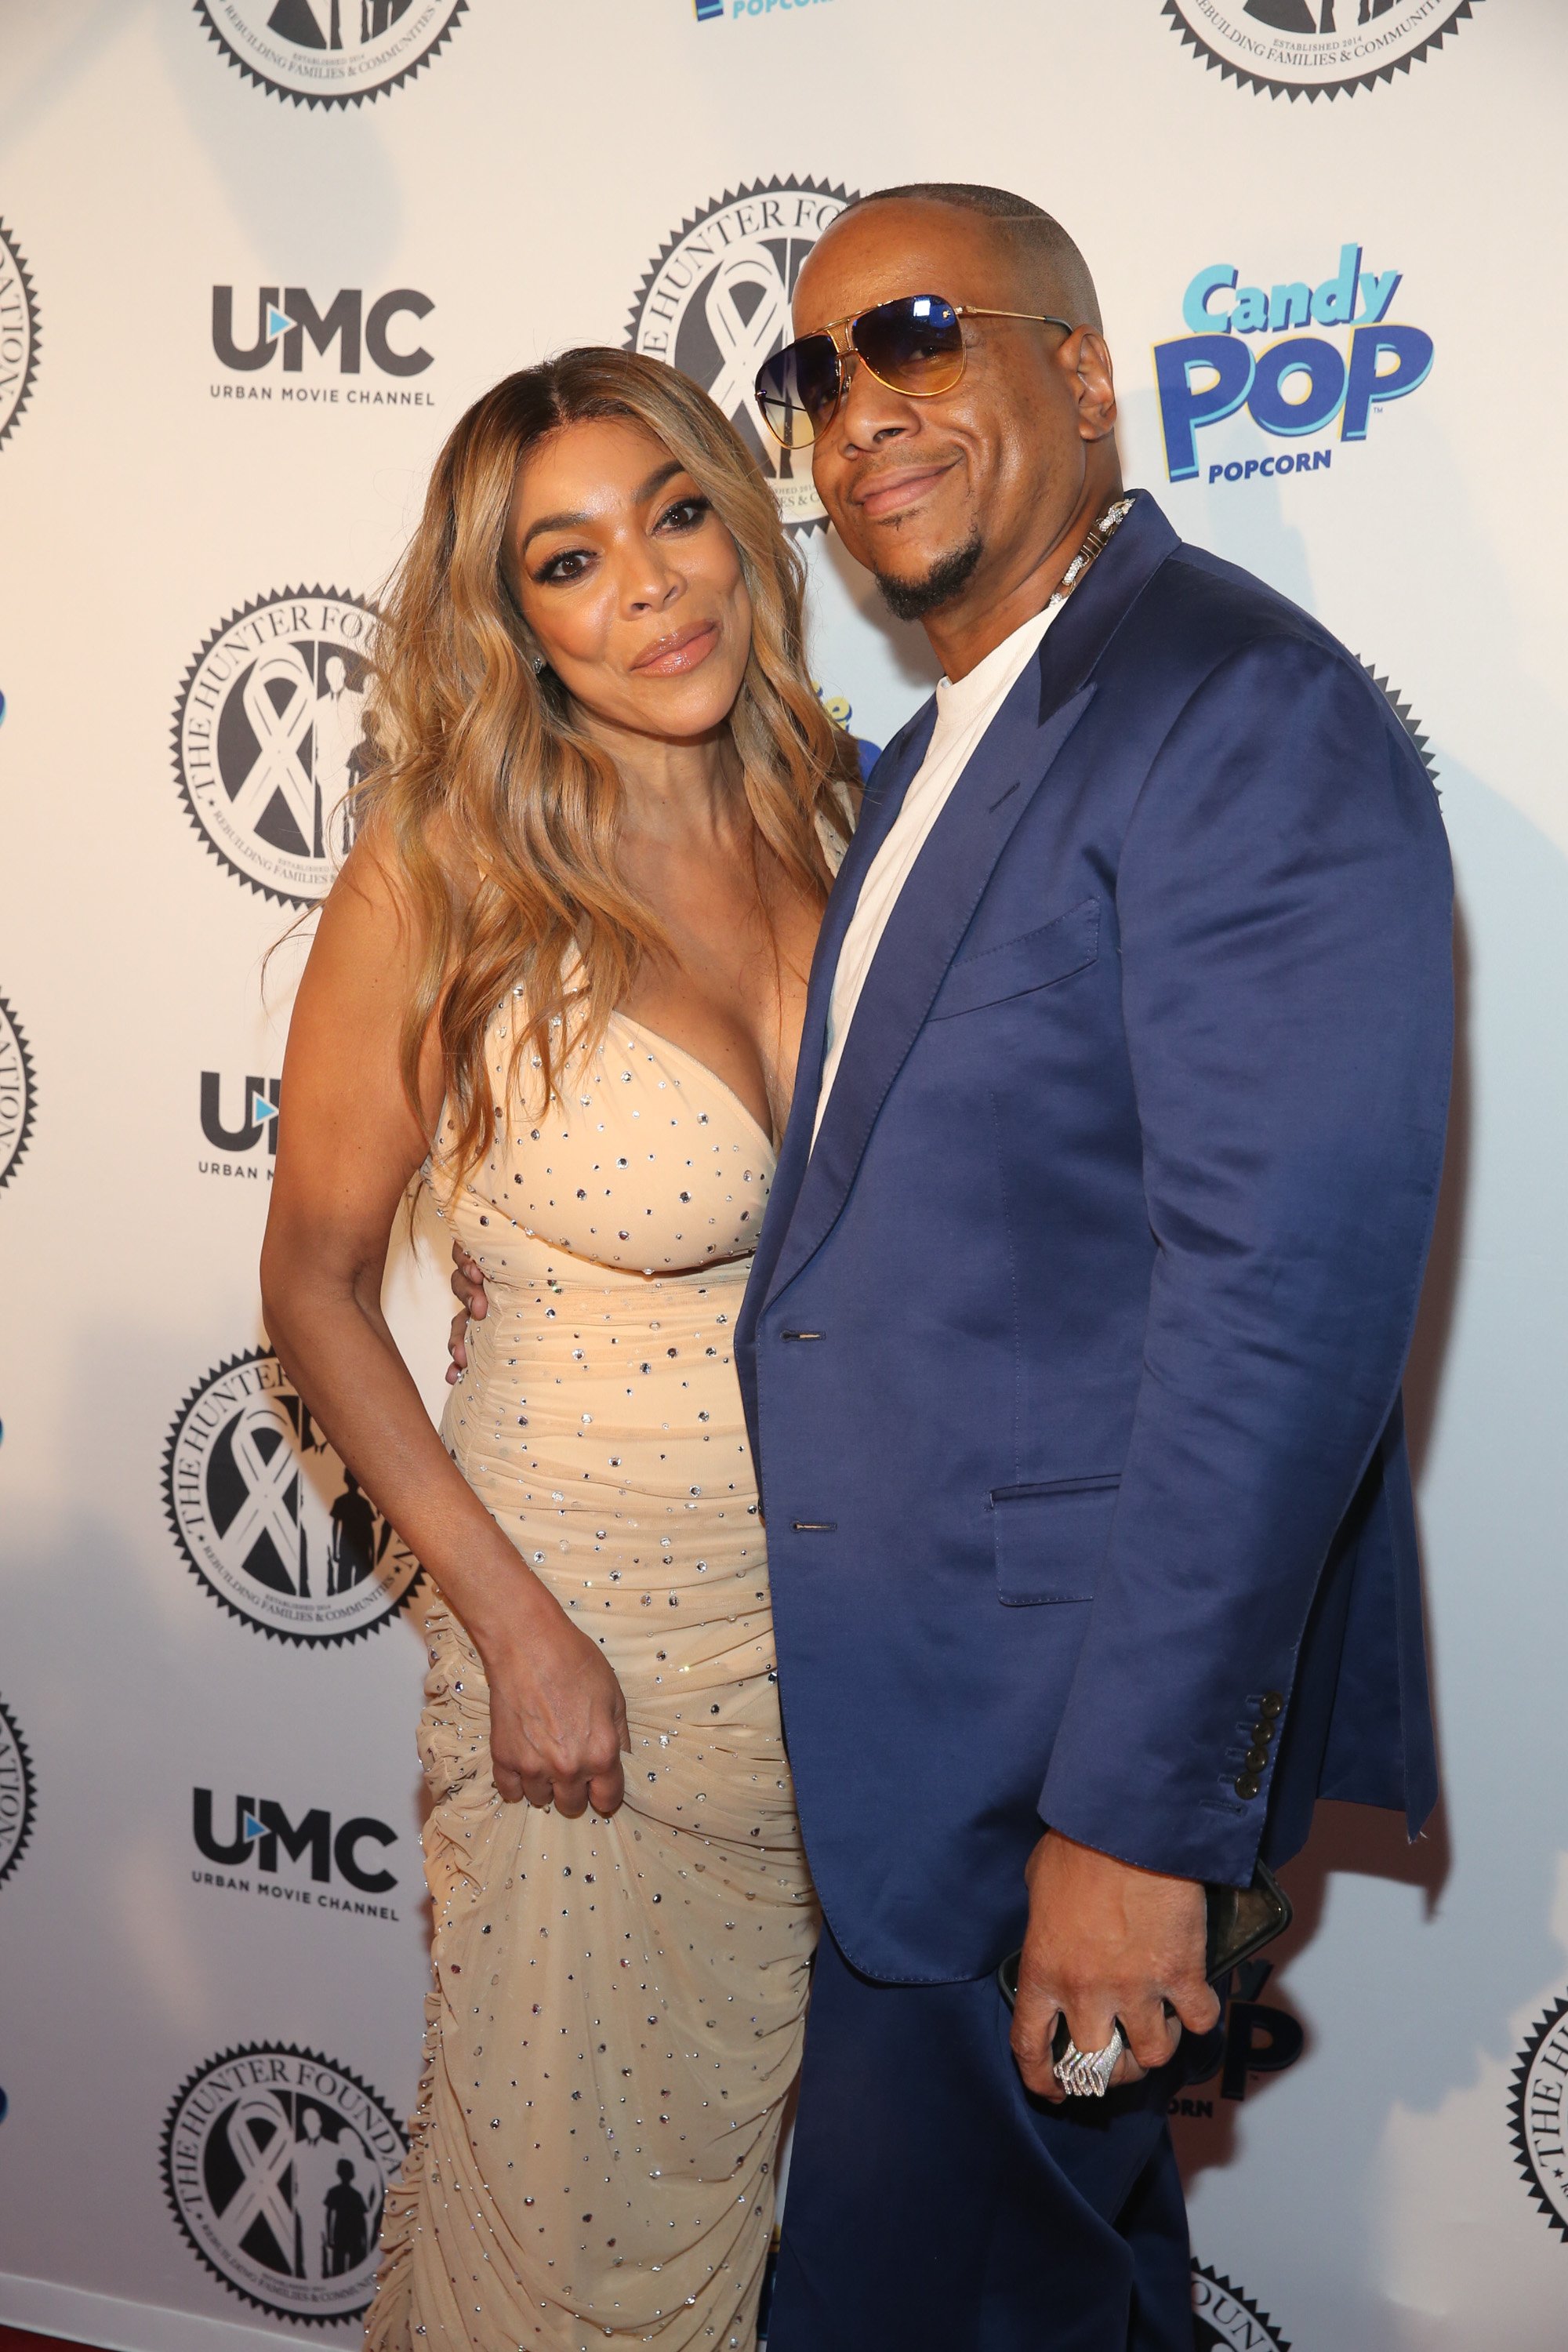 Wendy Williams and Kevin Hunter attend The Hunter Foundation gala at Hammerstein Ballroom. | Source: GettyImages